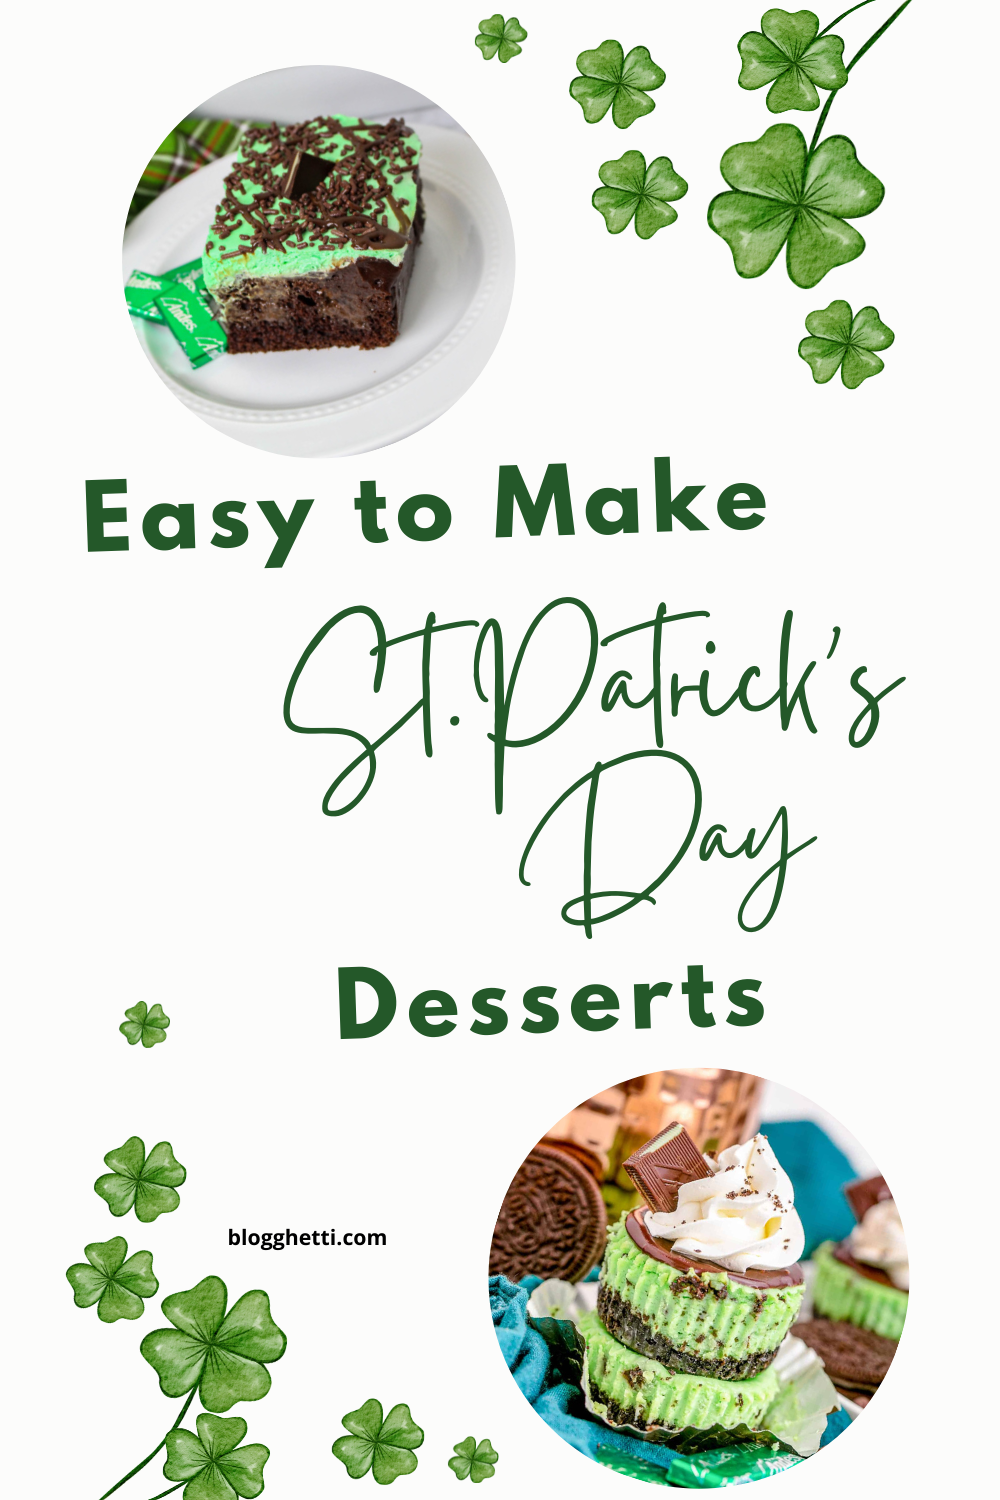 10 Easy to Make St. Patrick’s Day Desserts